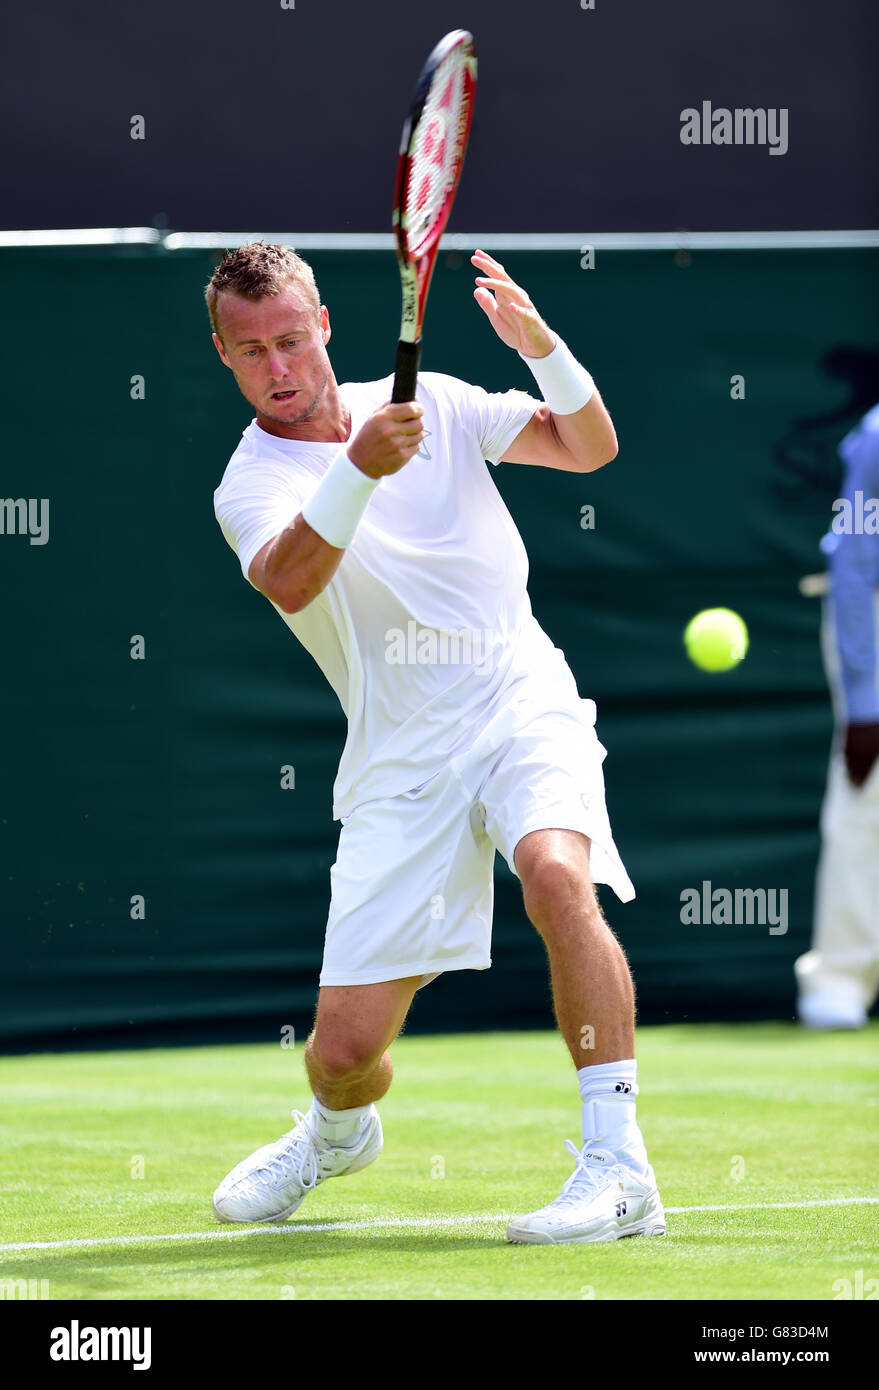 Lleyton Hewitt in action against Jarkko Nieminen during day one of the Wimbledon Championships at the All England Lawn Tennis and Croquet Club, Wimbledon. Stock Photo